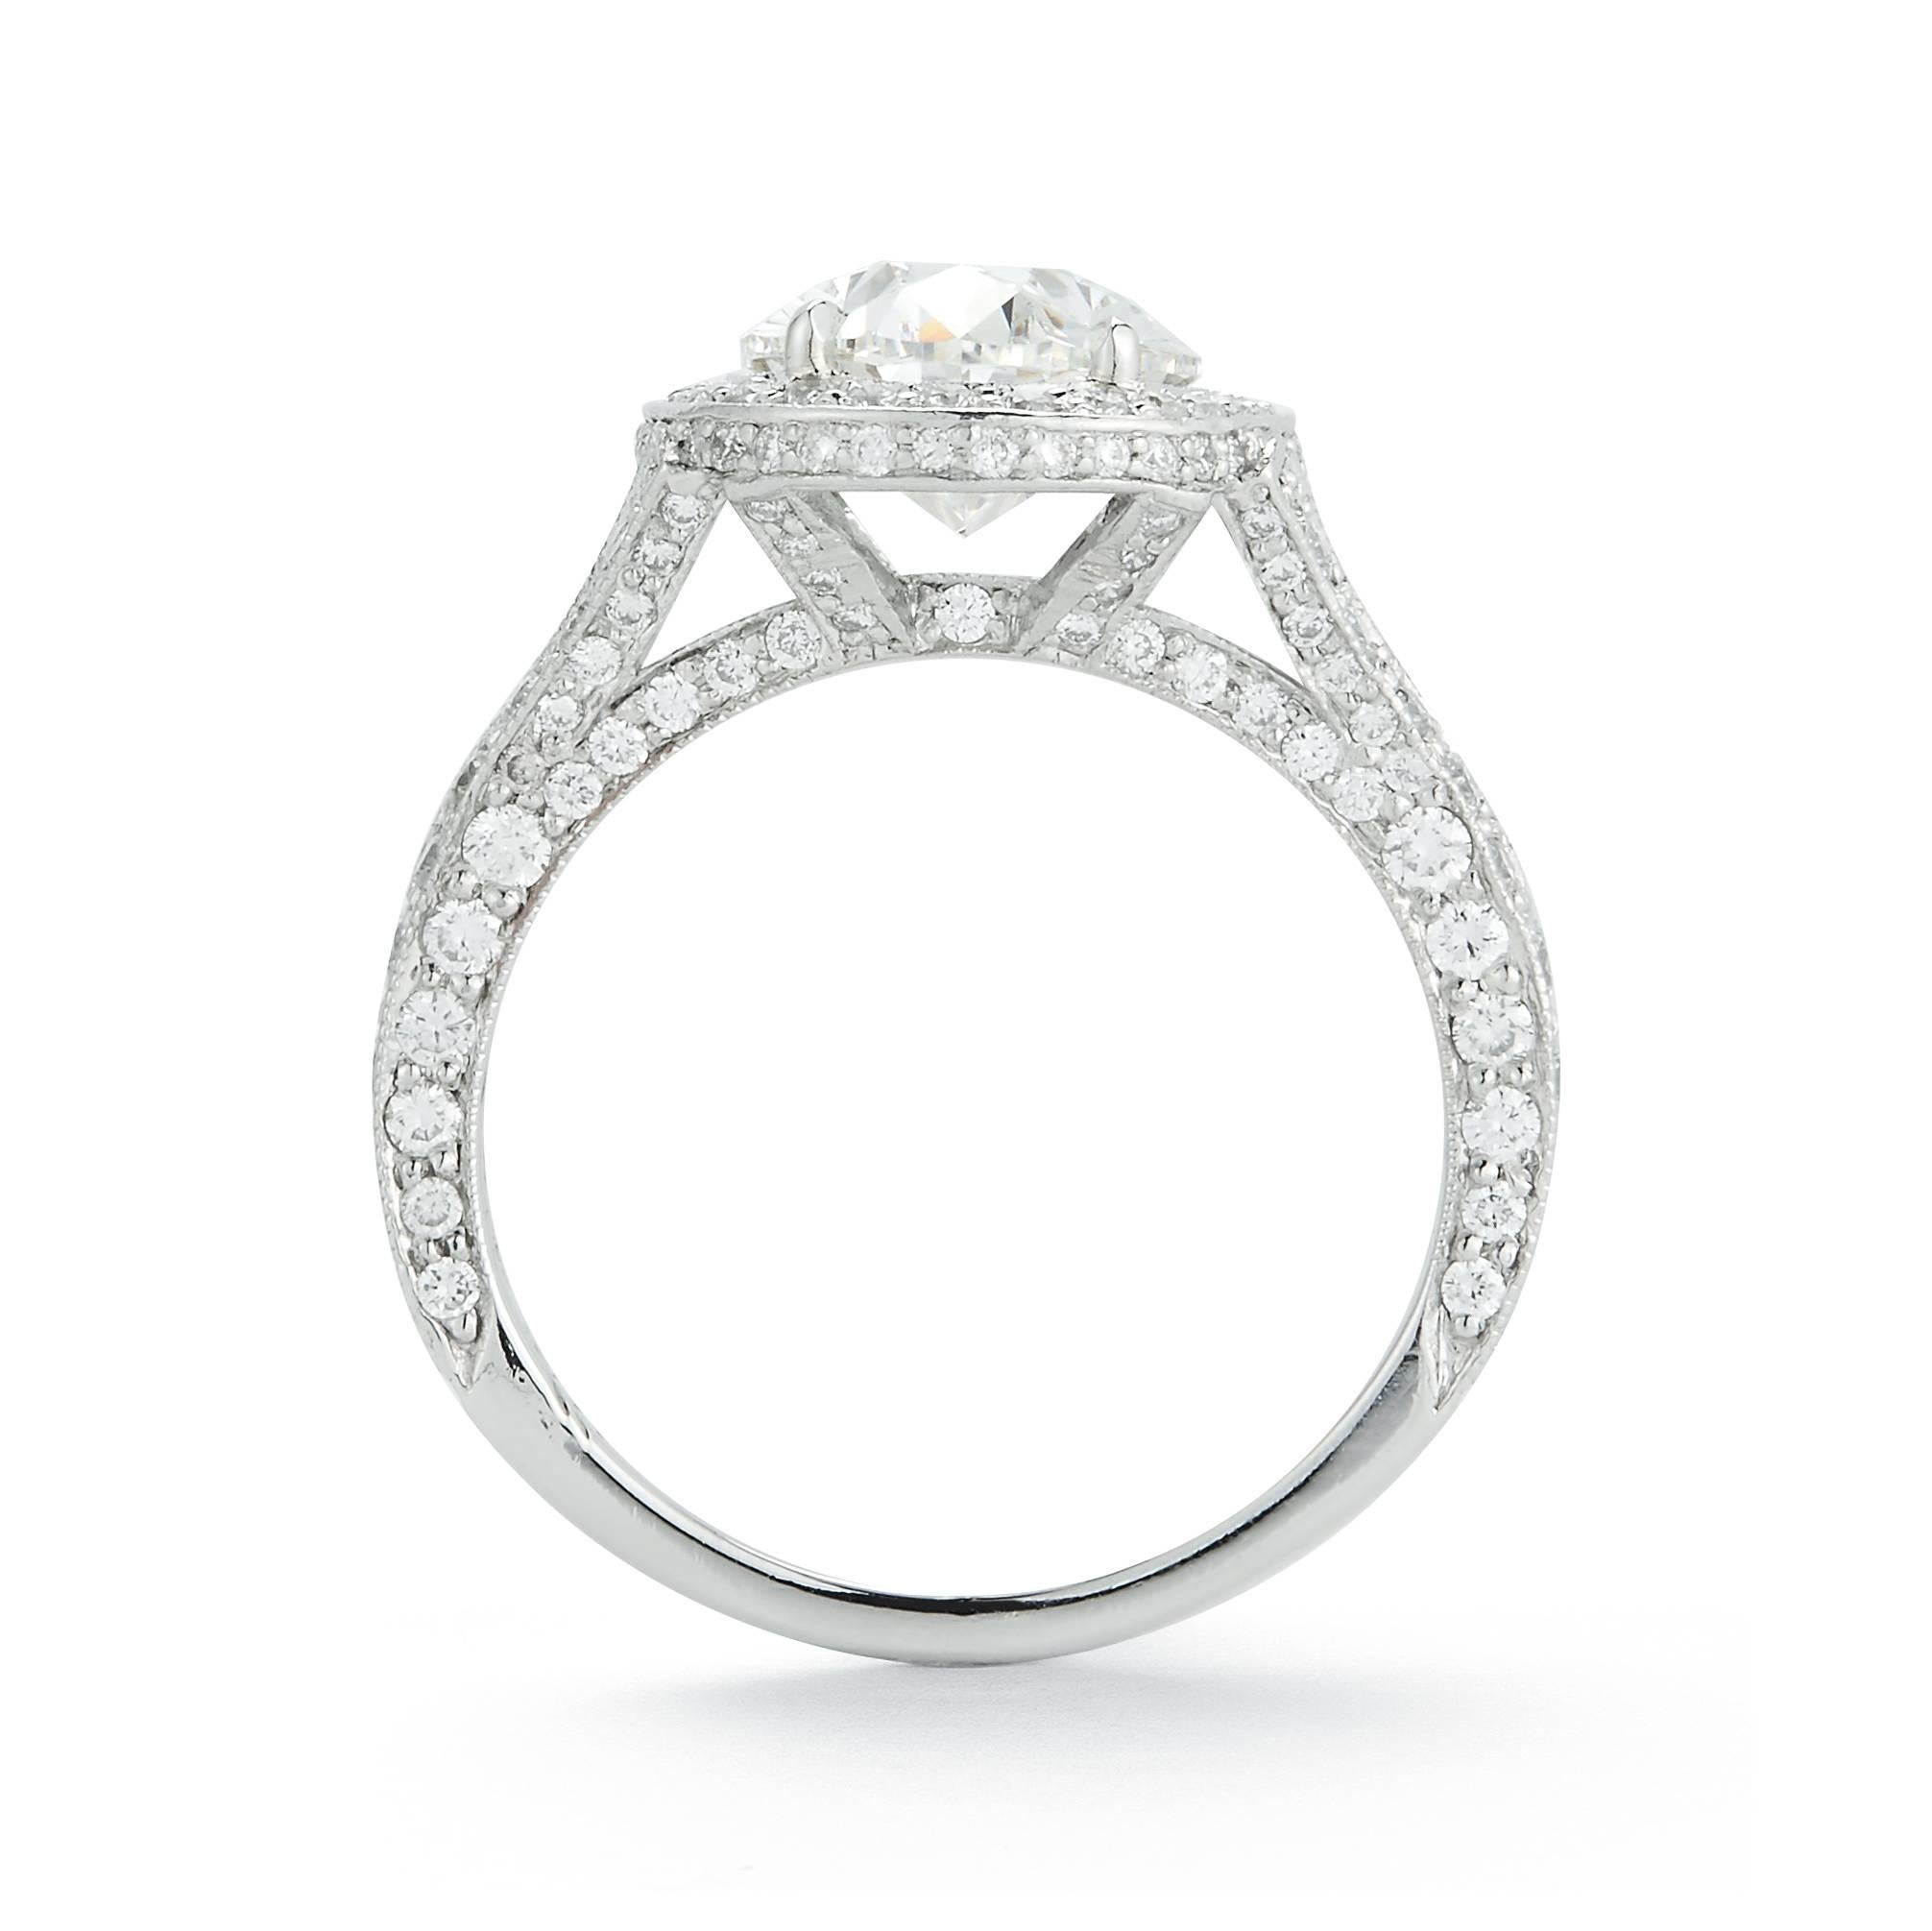 Set with an oval-cut diamond, weighing approximately 2.60 carats, within a round brilliant diamond halo and gallery to the diamond-set bifurcated shoulders, mounted in platinum

Size 5 1/4 (can be sized)

With report 17629693 dated 3 October 2017